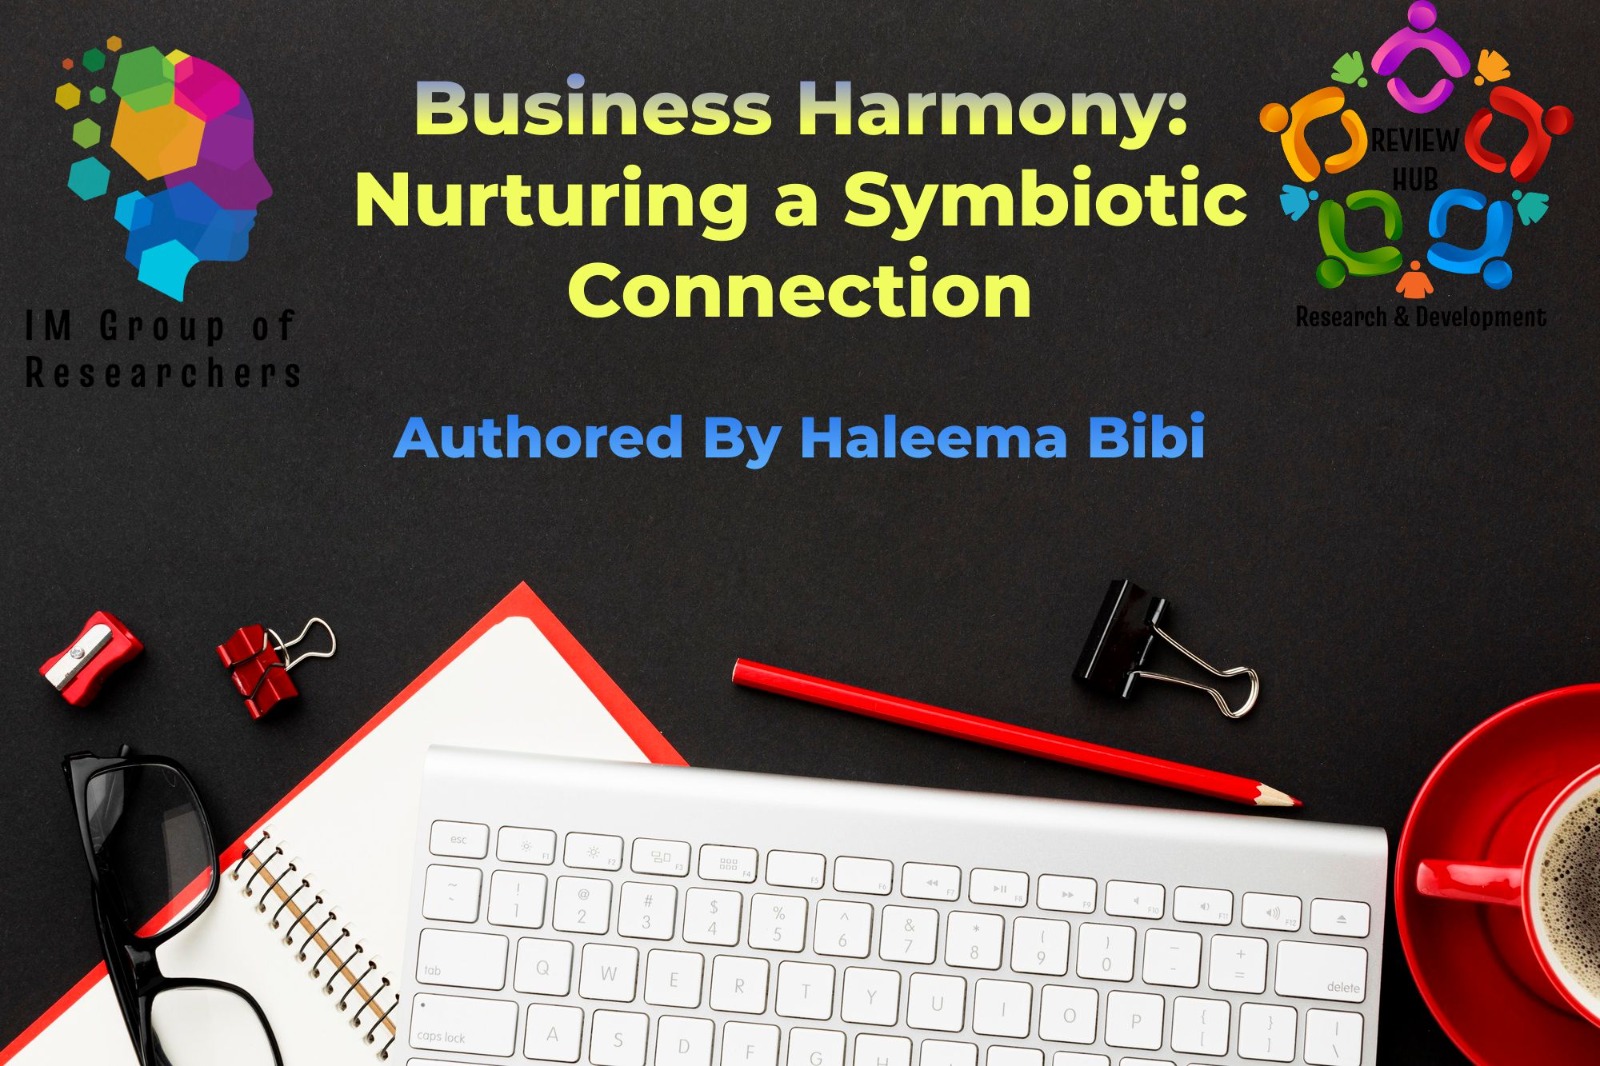 Business Harmony: Nurturing a Symbiotic Connection